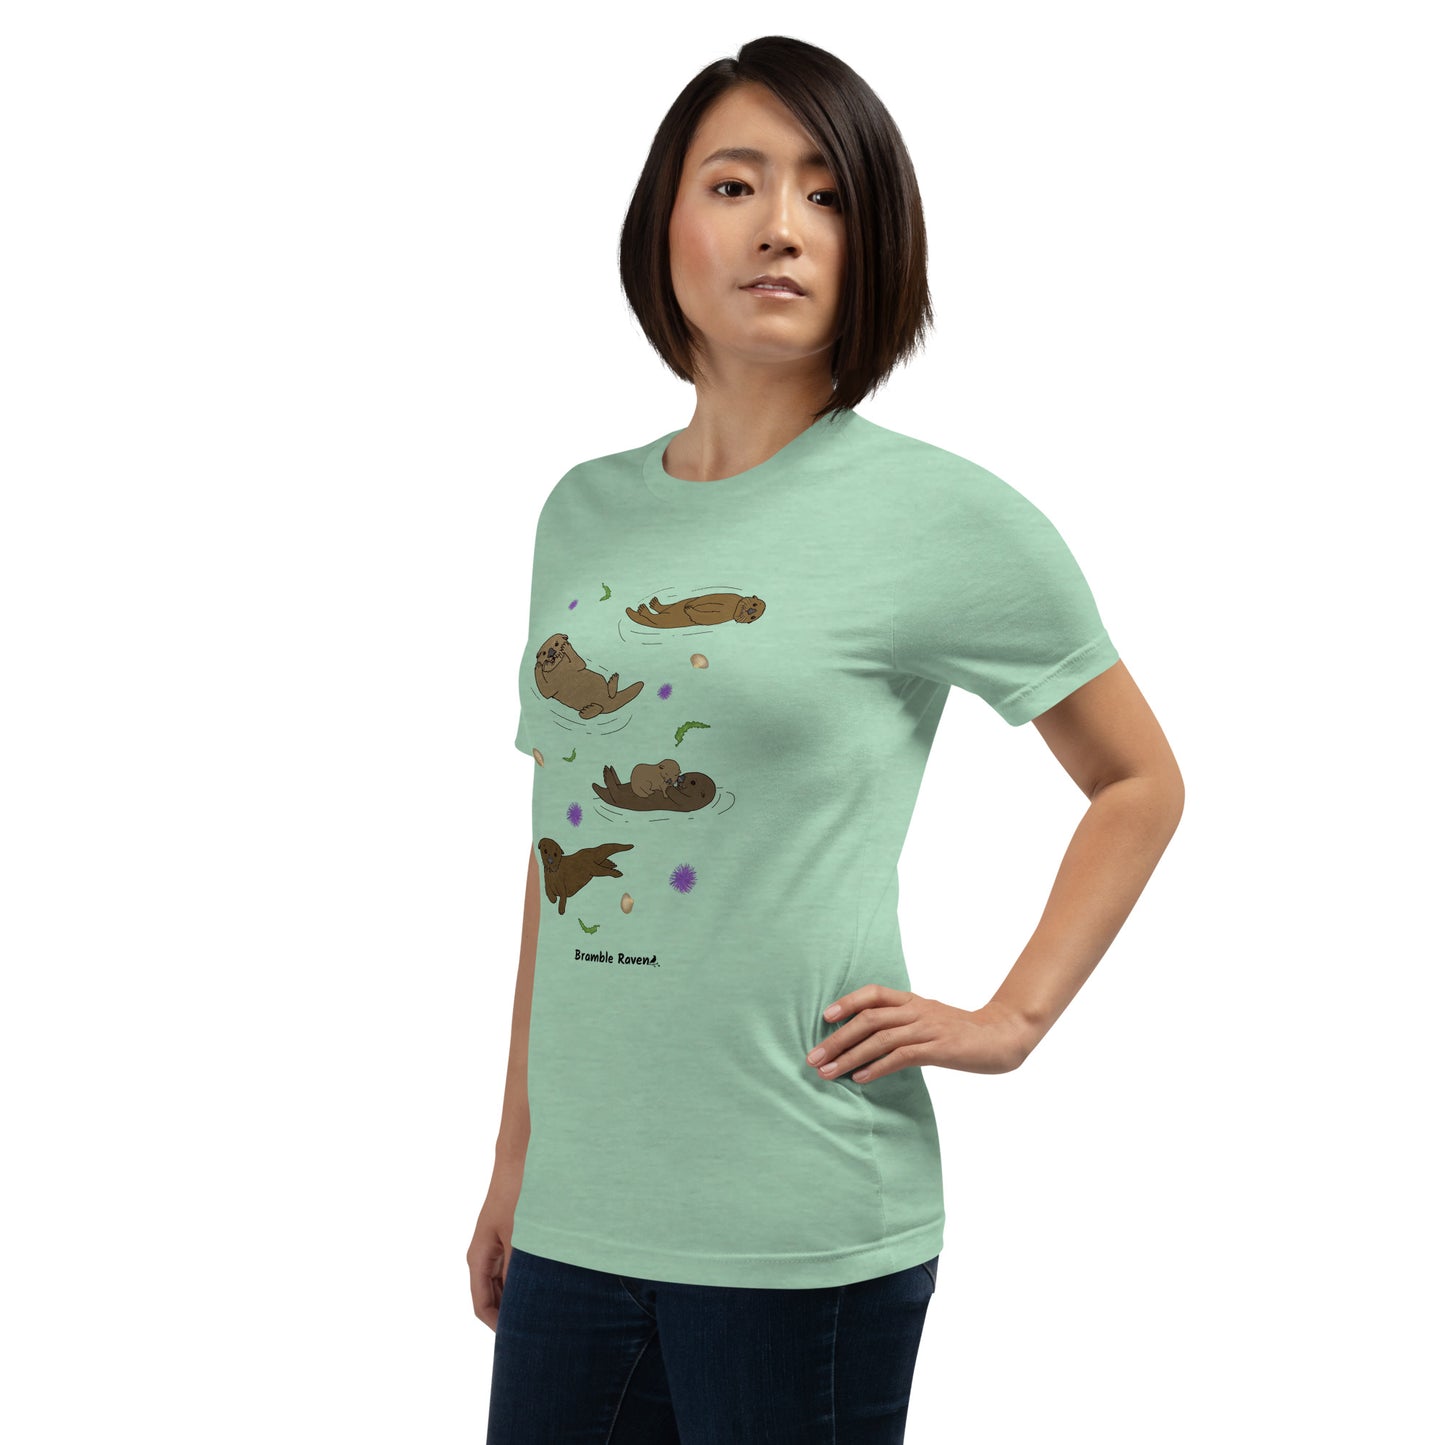 Unisex heather prism mint green colored t-shirt. Features four sea otters with seaweed, shells, and sea urchins. Shown on female model facing left.